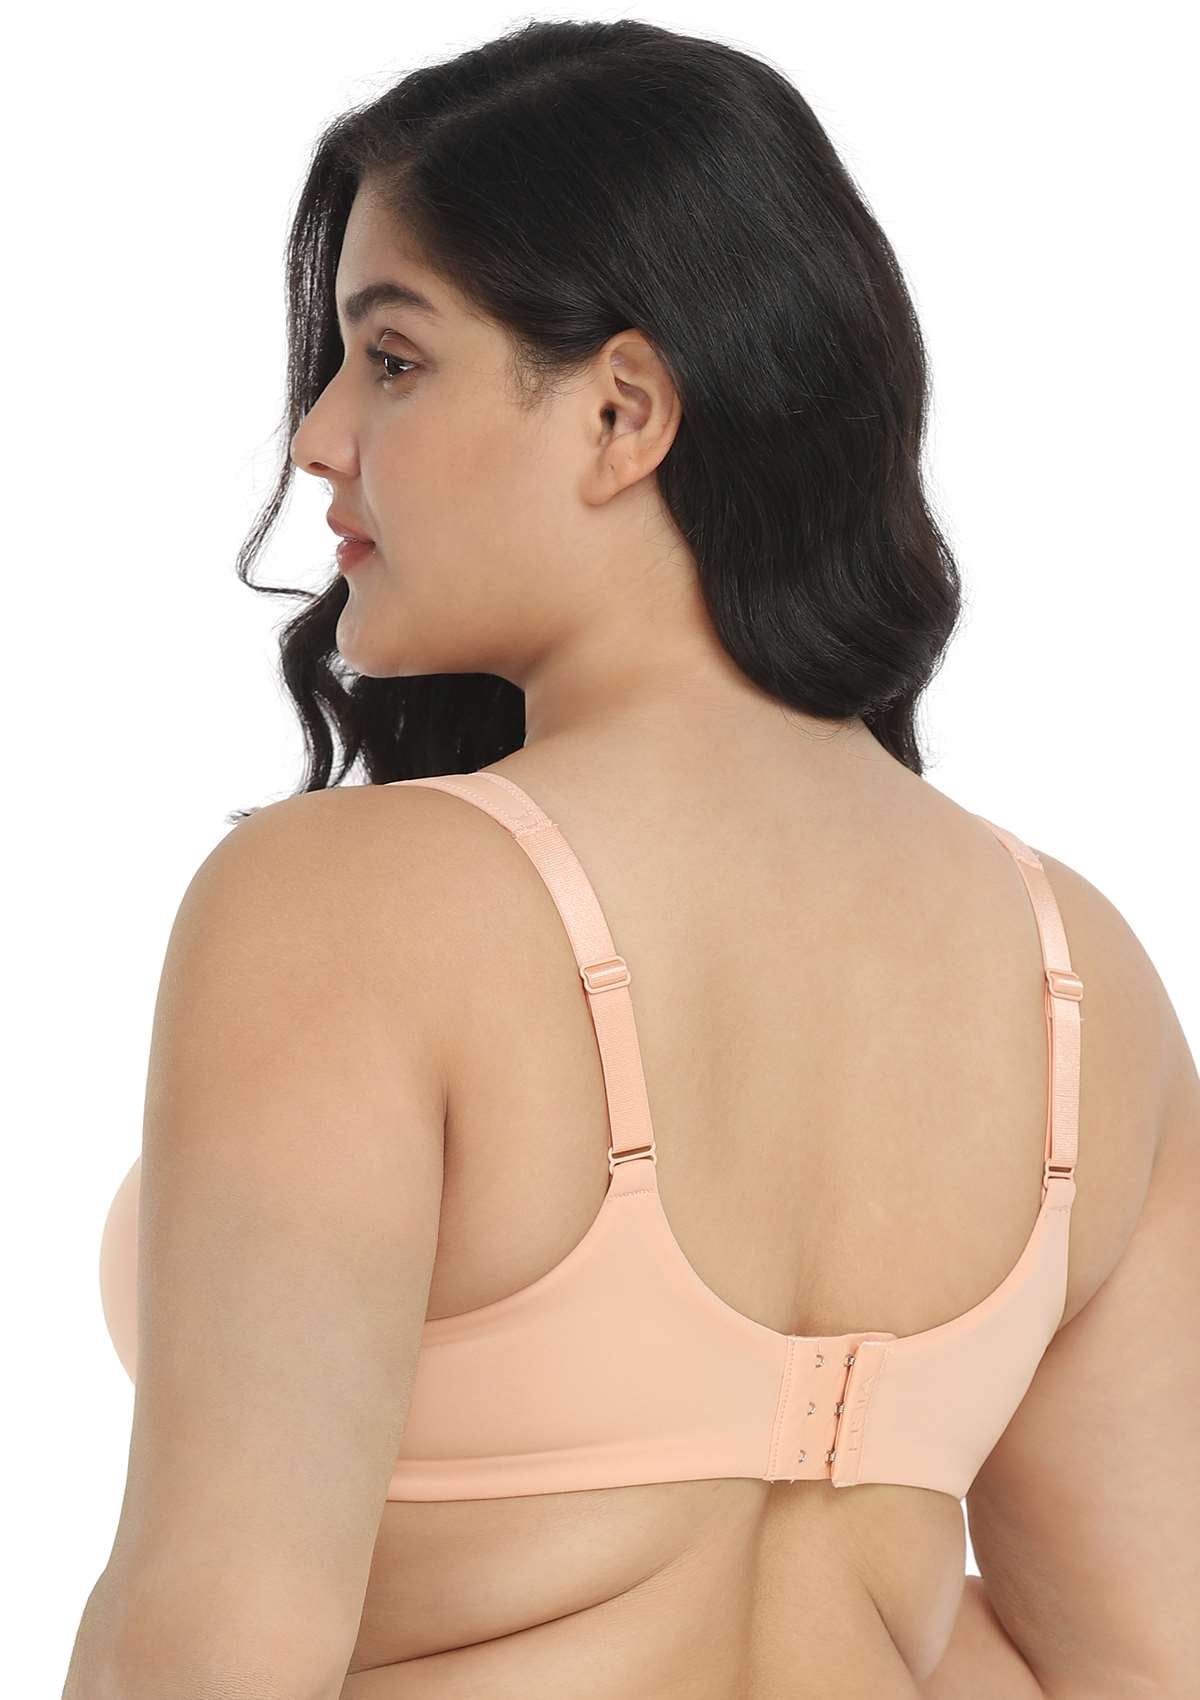 HSIA Patricia Smooth Classic T-shirt Lightly Padded Minimizer Bra - Light Pink / 36 / D